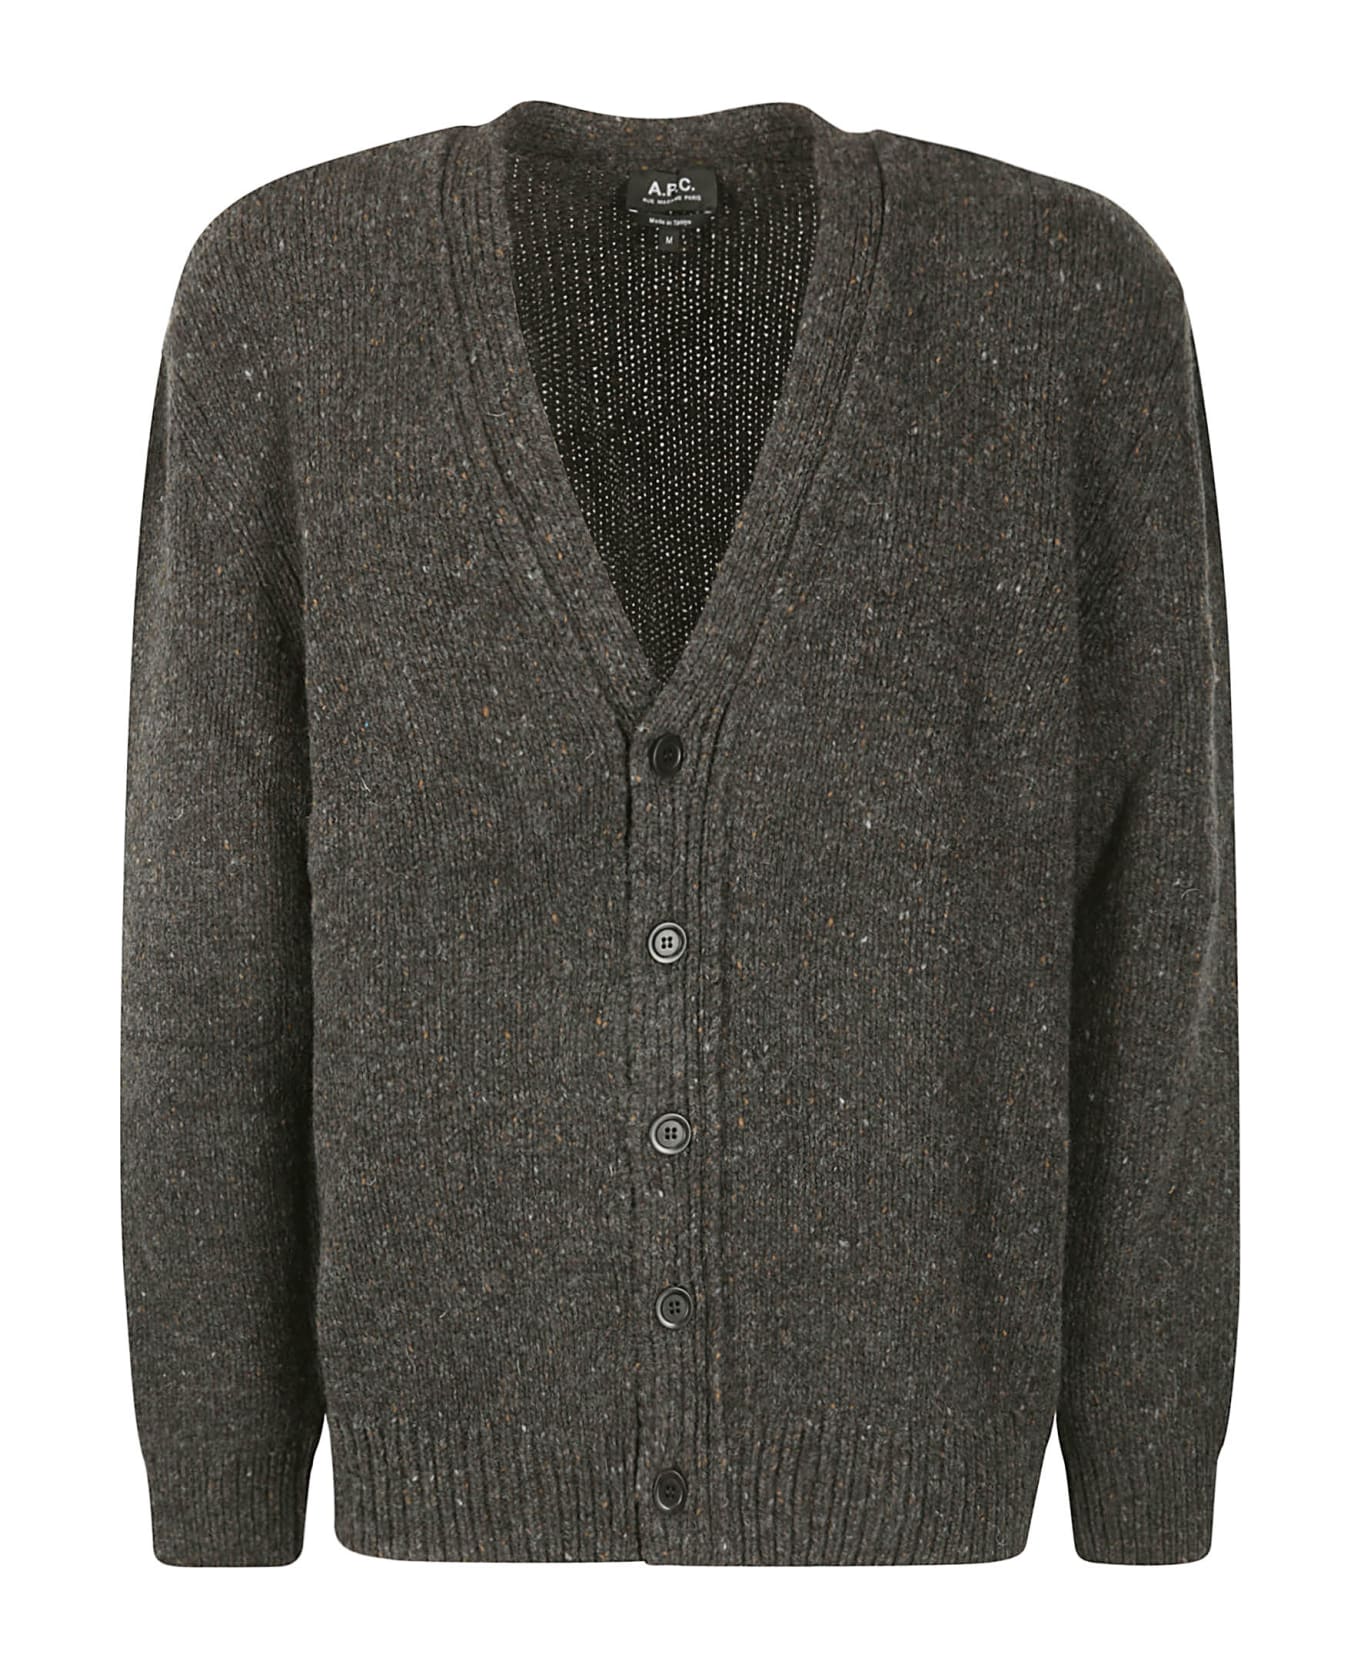 A.P.C. Teophile Button-up Cardigan - ANTHRACITE カーディガン